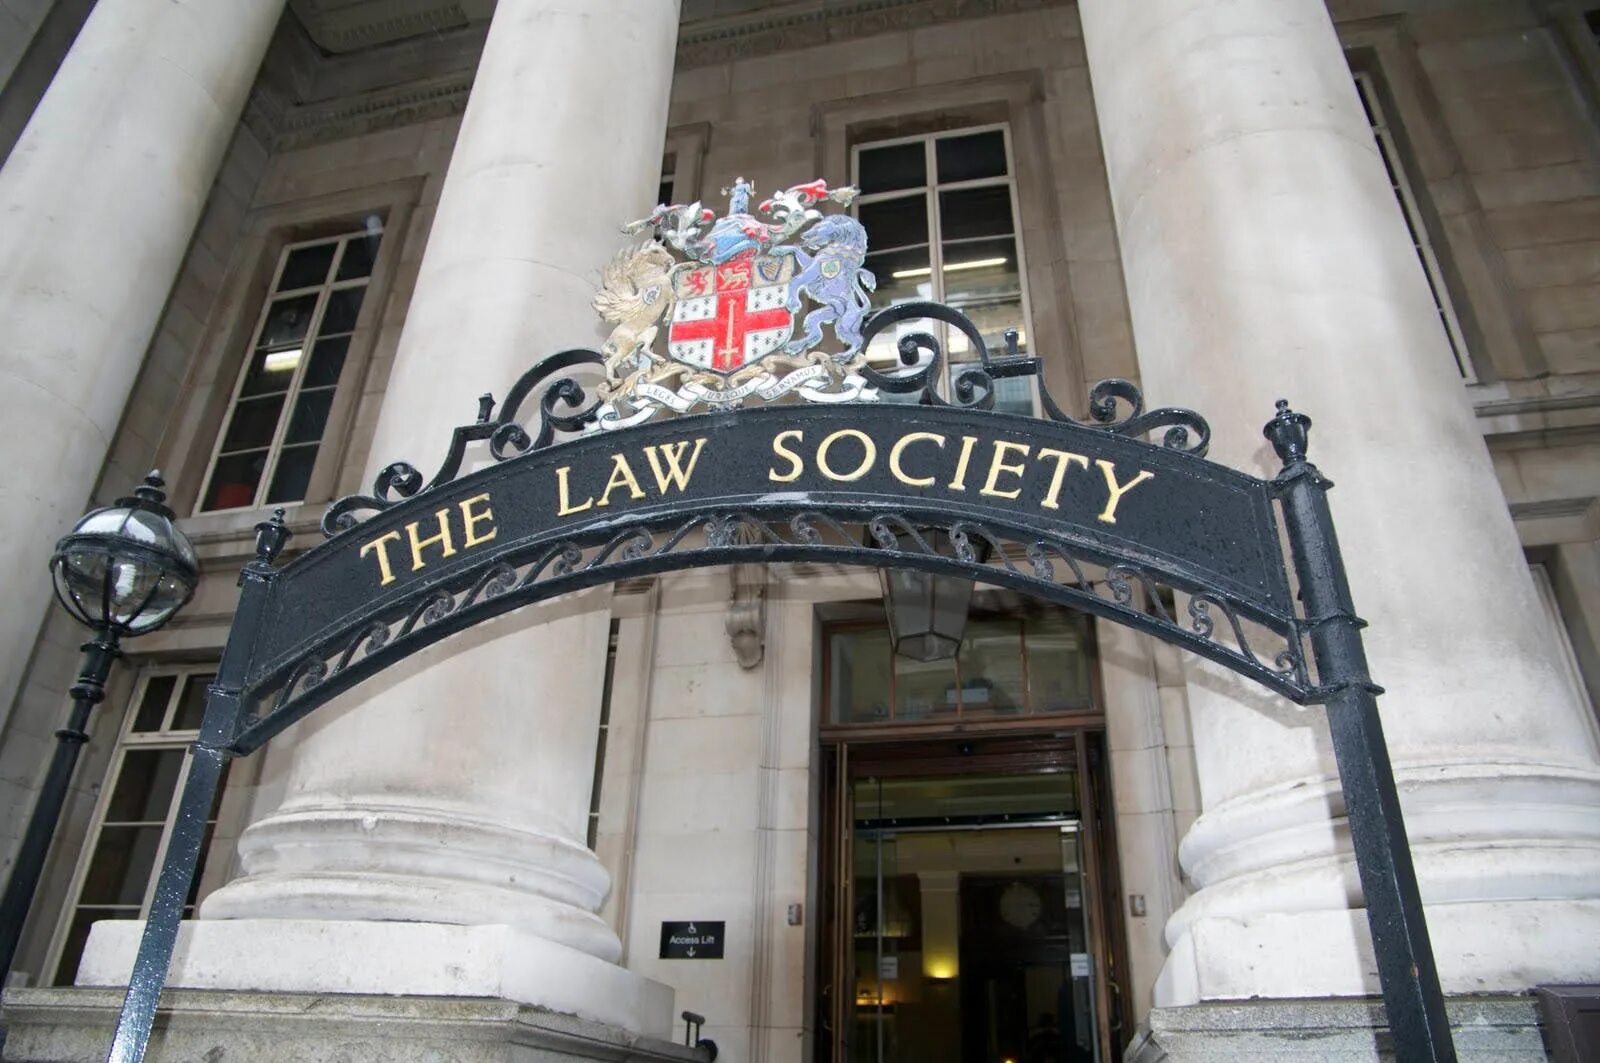 Ministry of justice. Law and Society. Law Society of England and Wales. High Court of Justice in London. High Court of Justice of England and Wales.